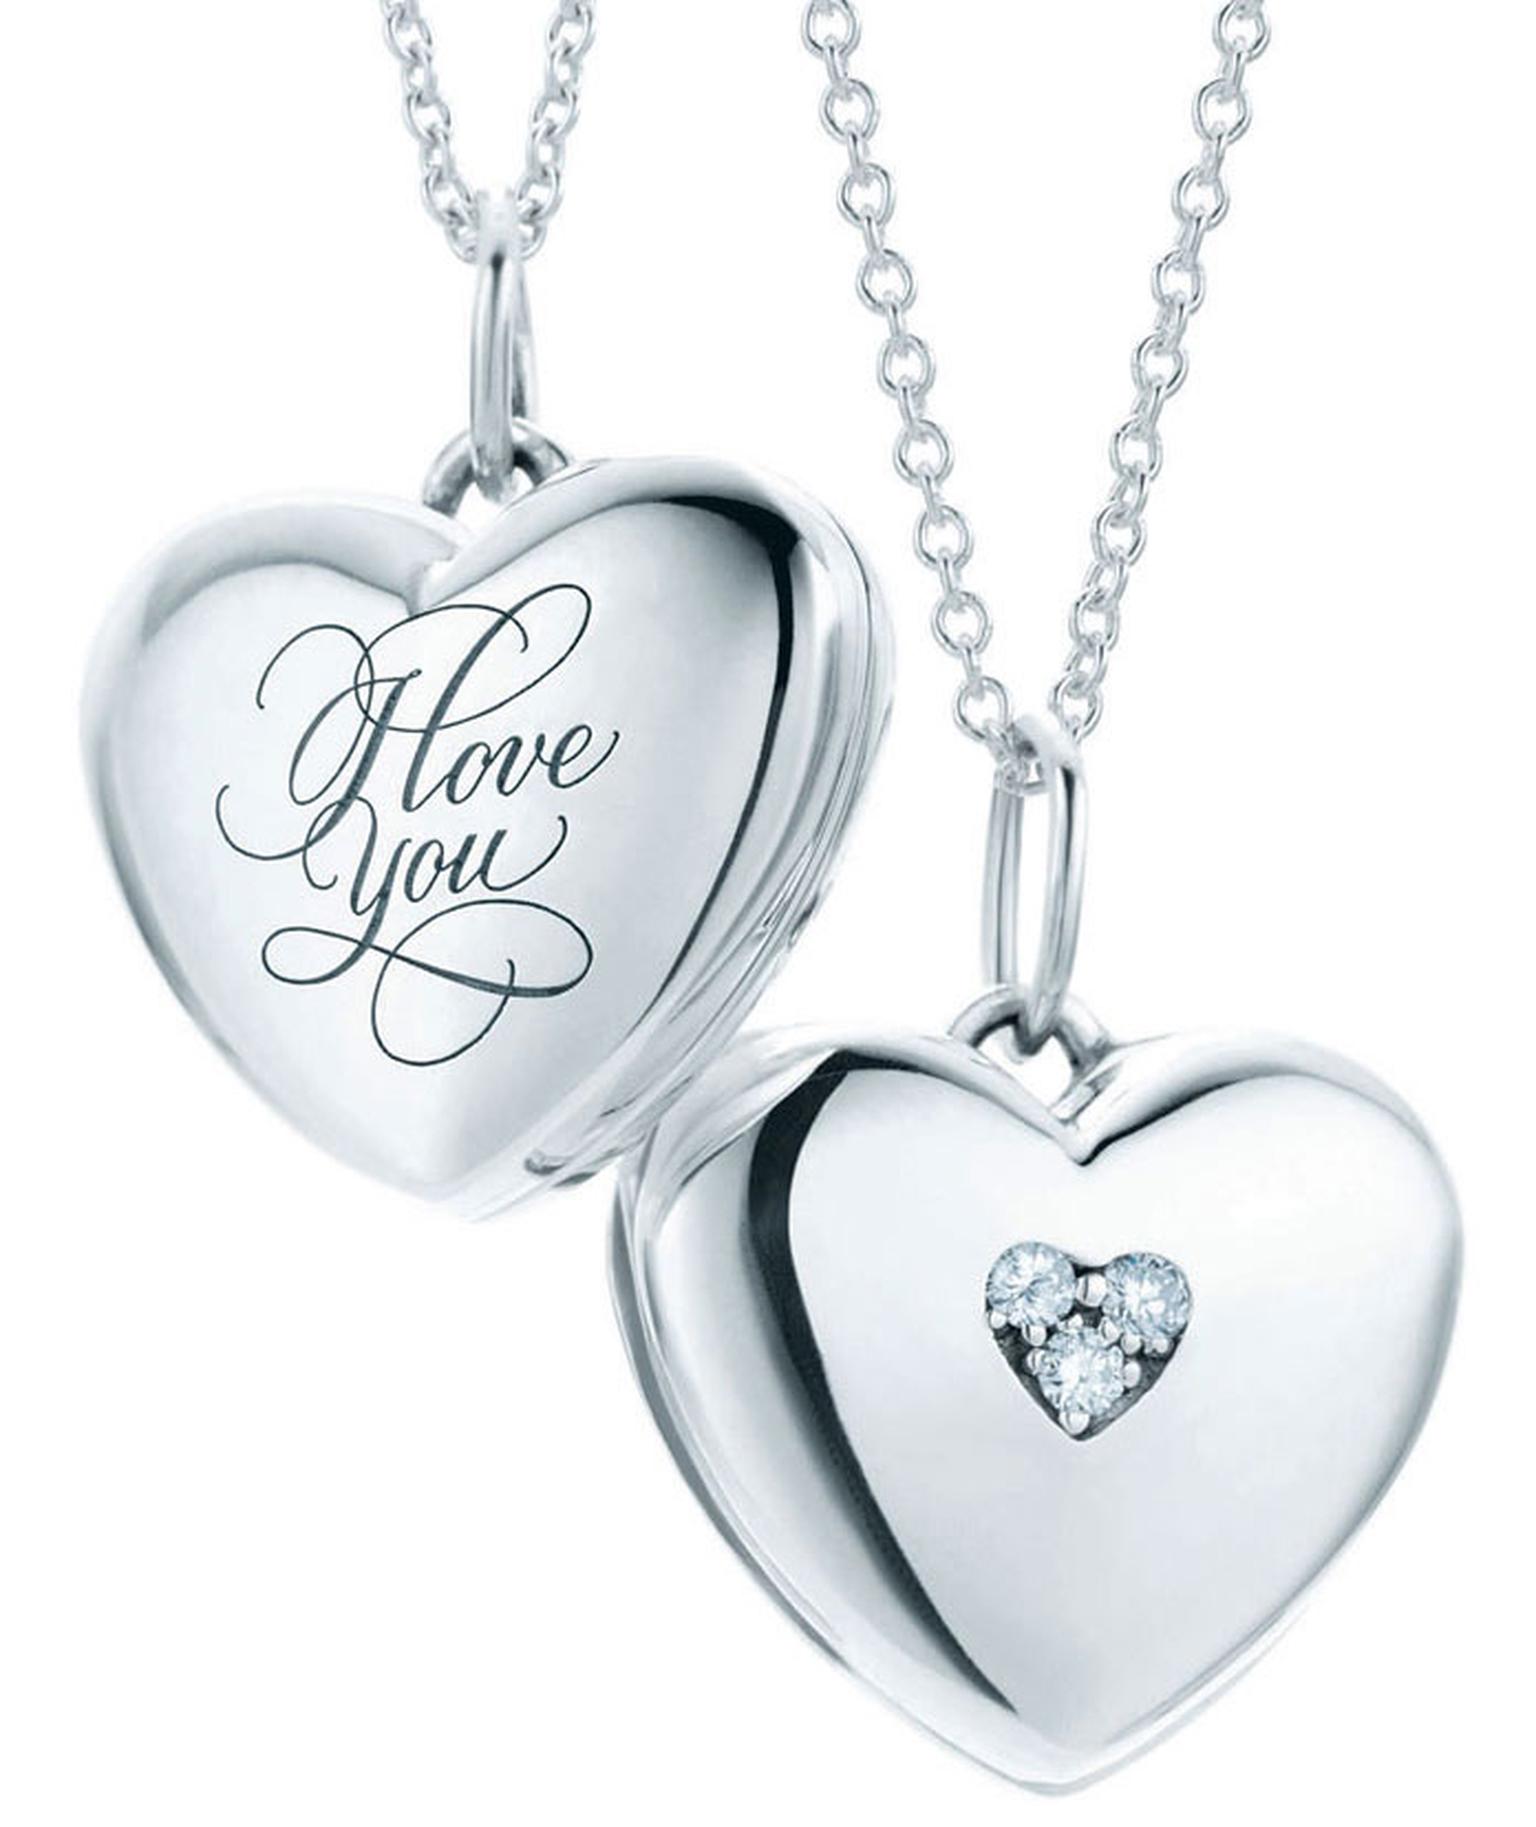 Valentines - Tiffany-Hearts-lockets-with-'I-Love-You'-inscription-in-sterling-silver-with-diamond-on-sterling-silver-pendant-chain-price-from-325GBP